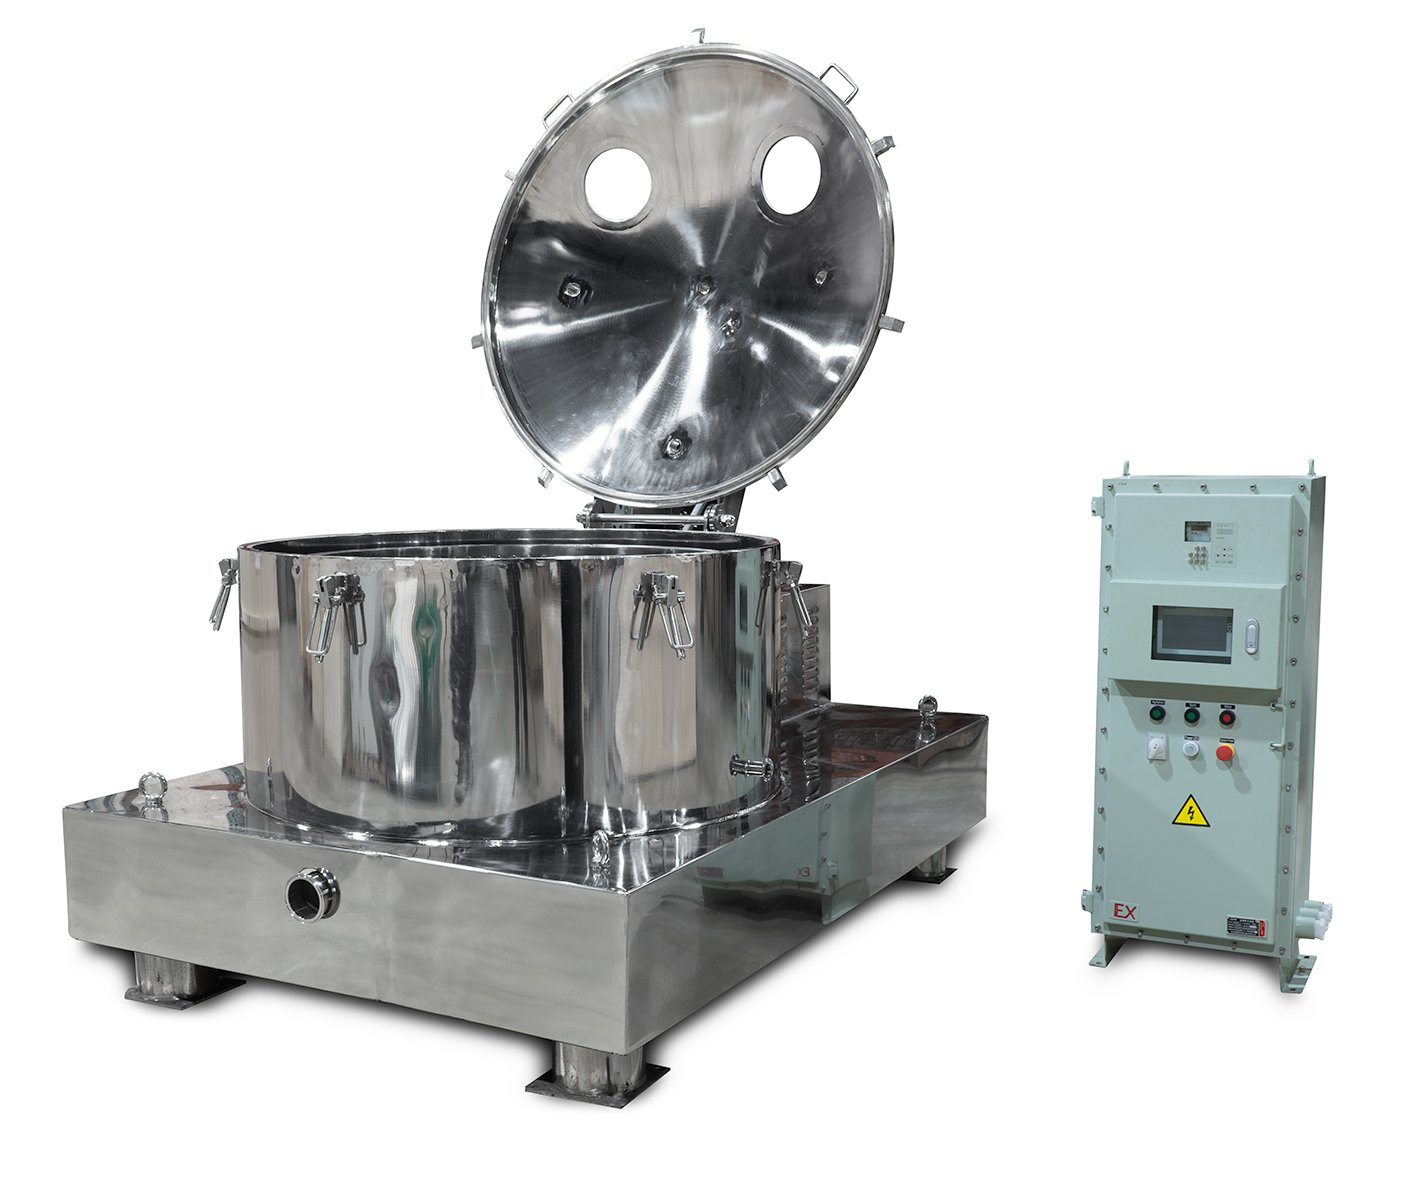 BVV 160L Jacketed Stainless Steel Centrifuge with Explosion Proof Motor and Siemens Controller - 55LB Max Capacity